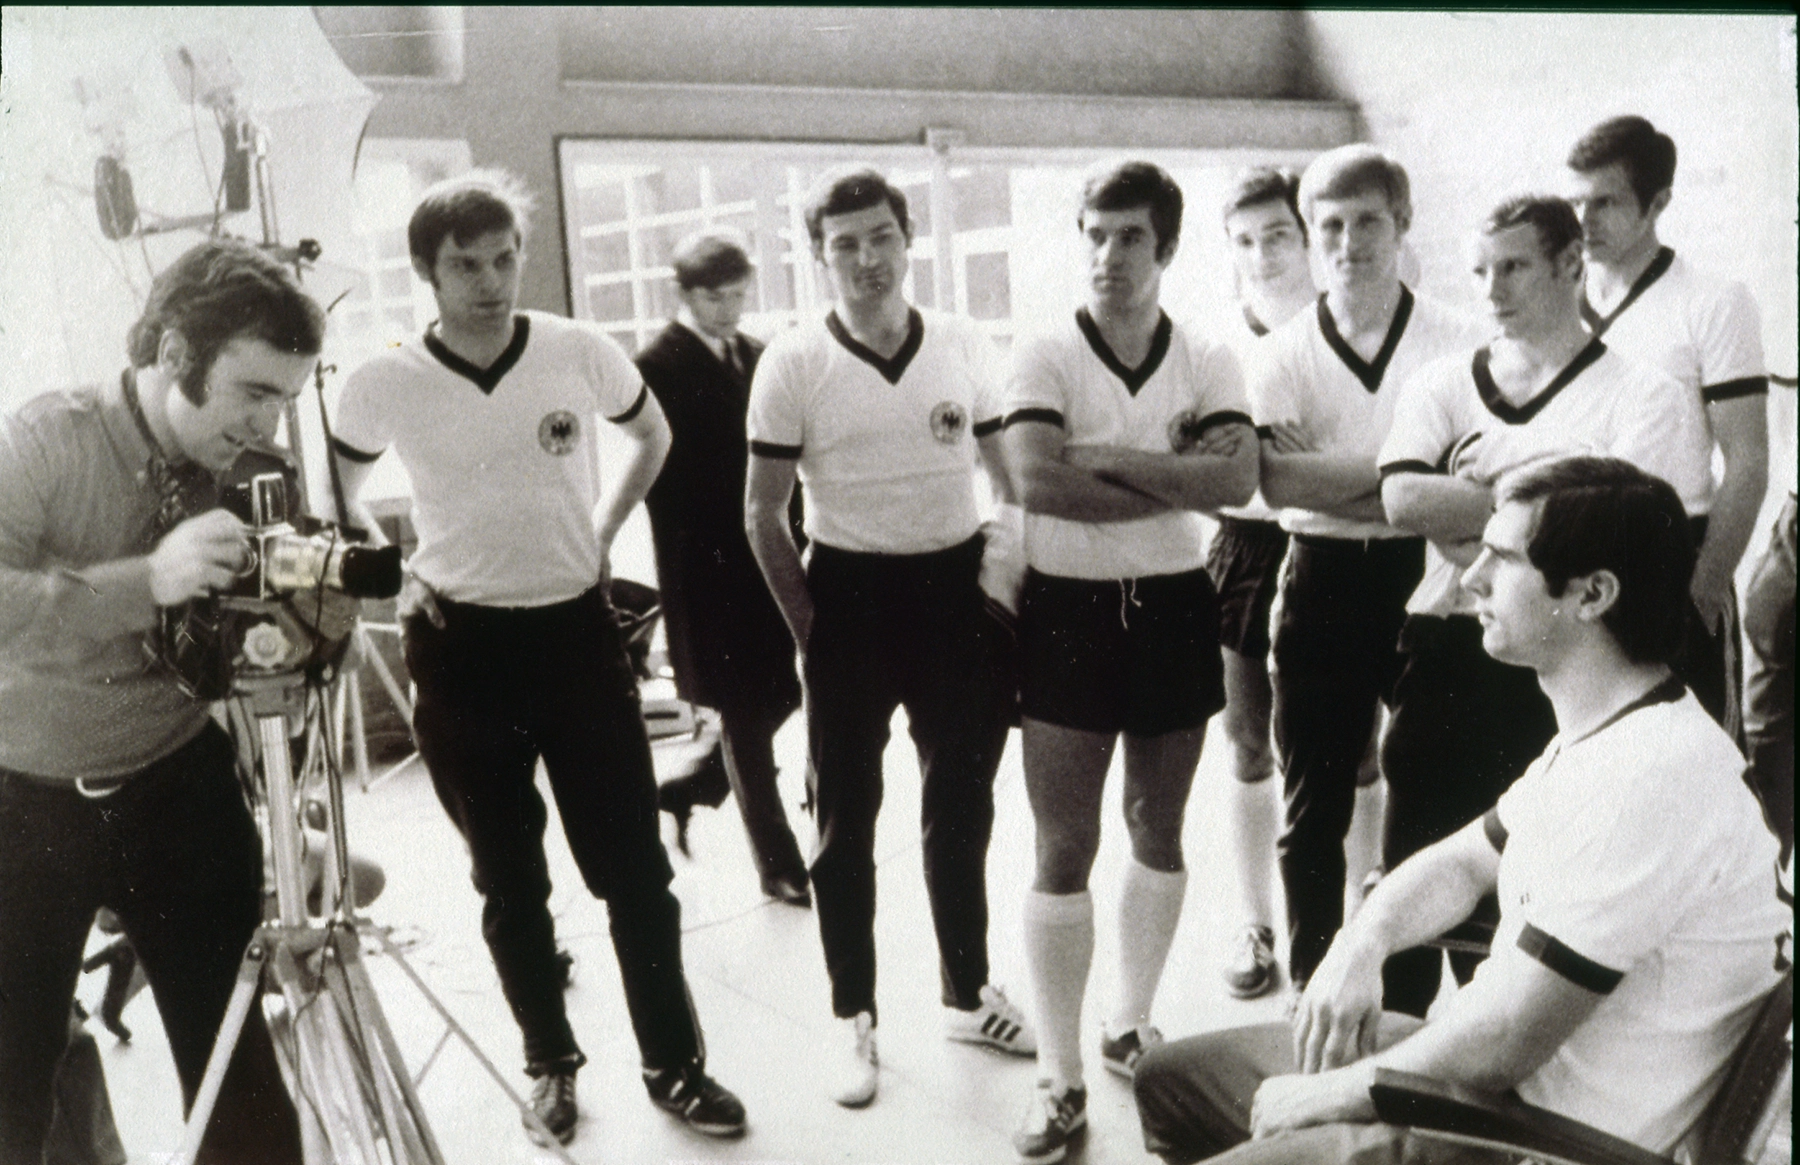 Unknown, Joachim Giesel photographs the german national team for football collection albums (here Gerd Müller), 1969.